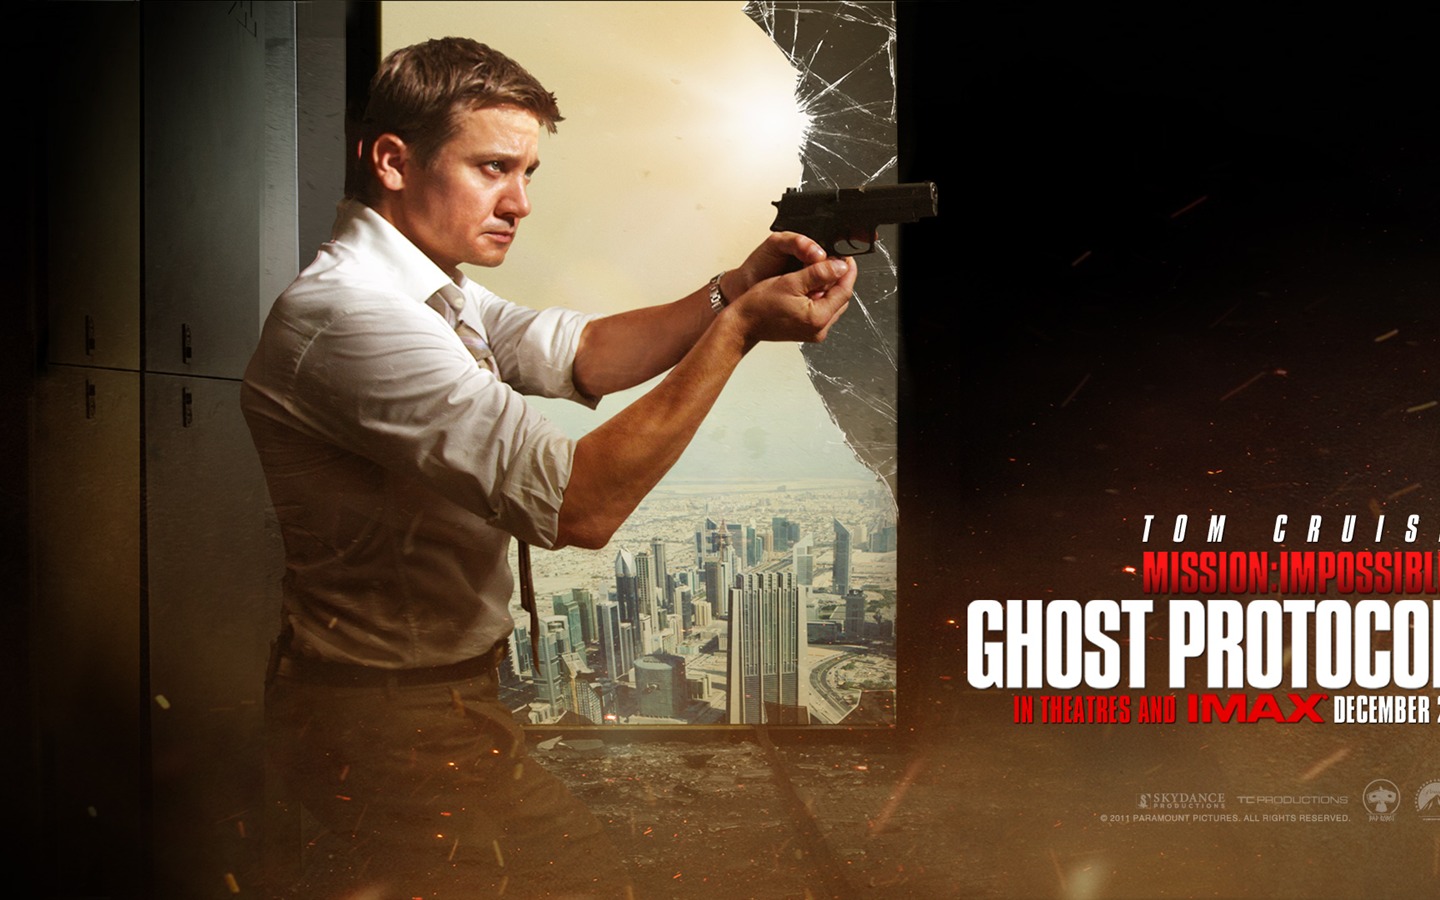 Mission: Impossible - Ghost Protocol 碟中谍4 高清壁纸2 - 1440x900